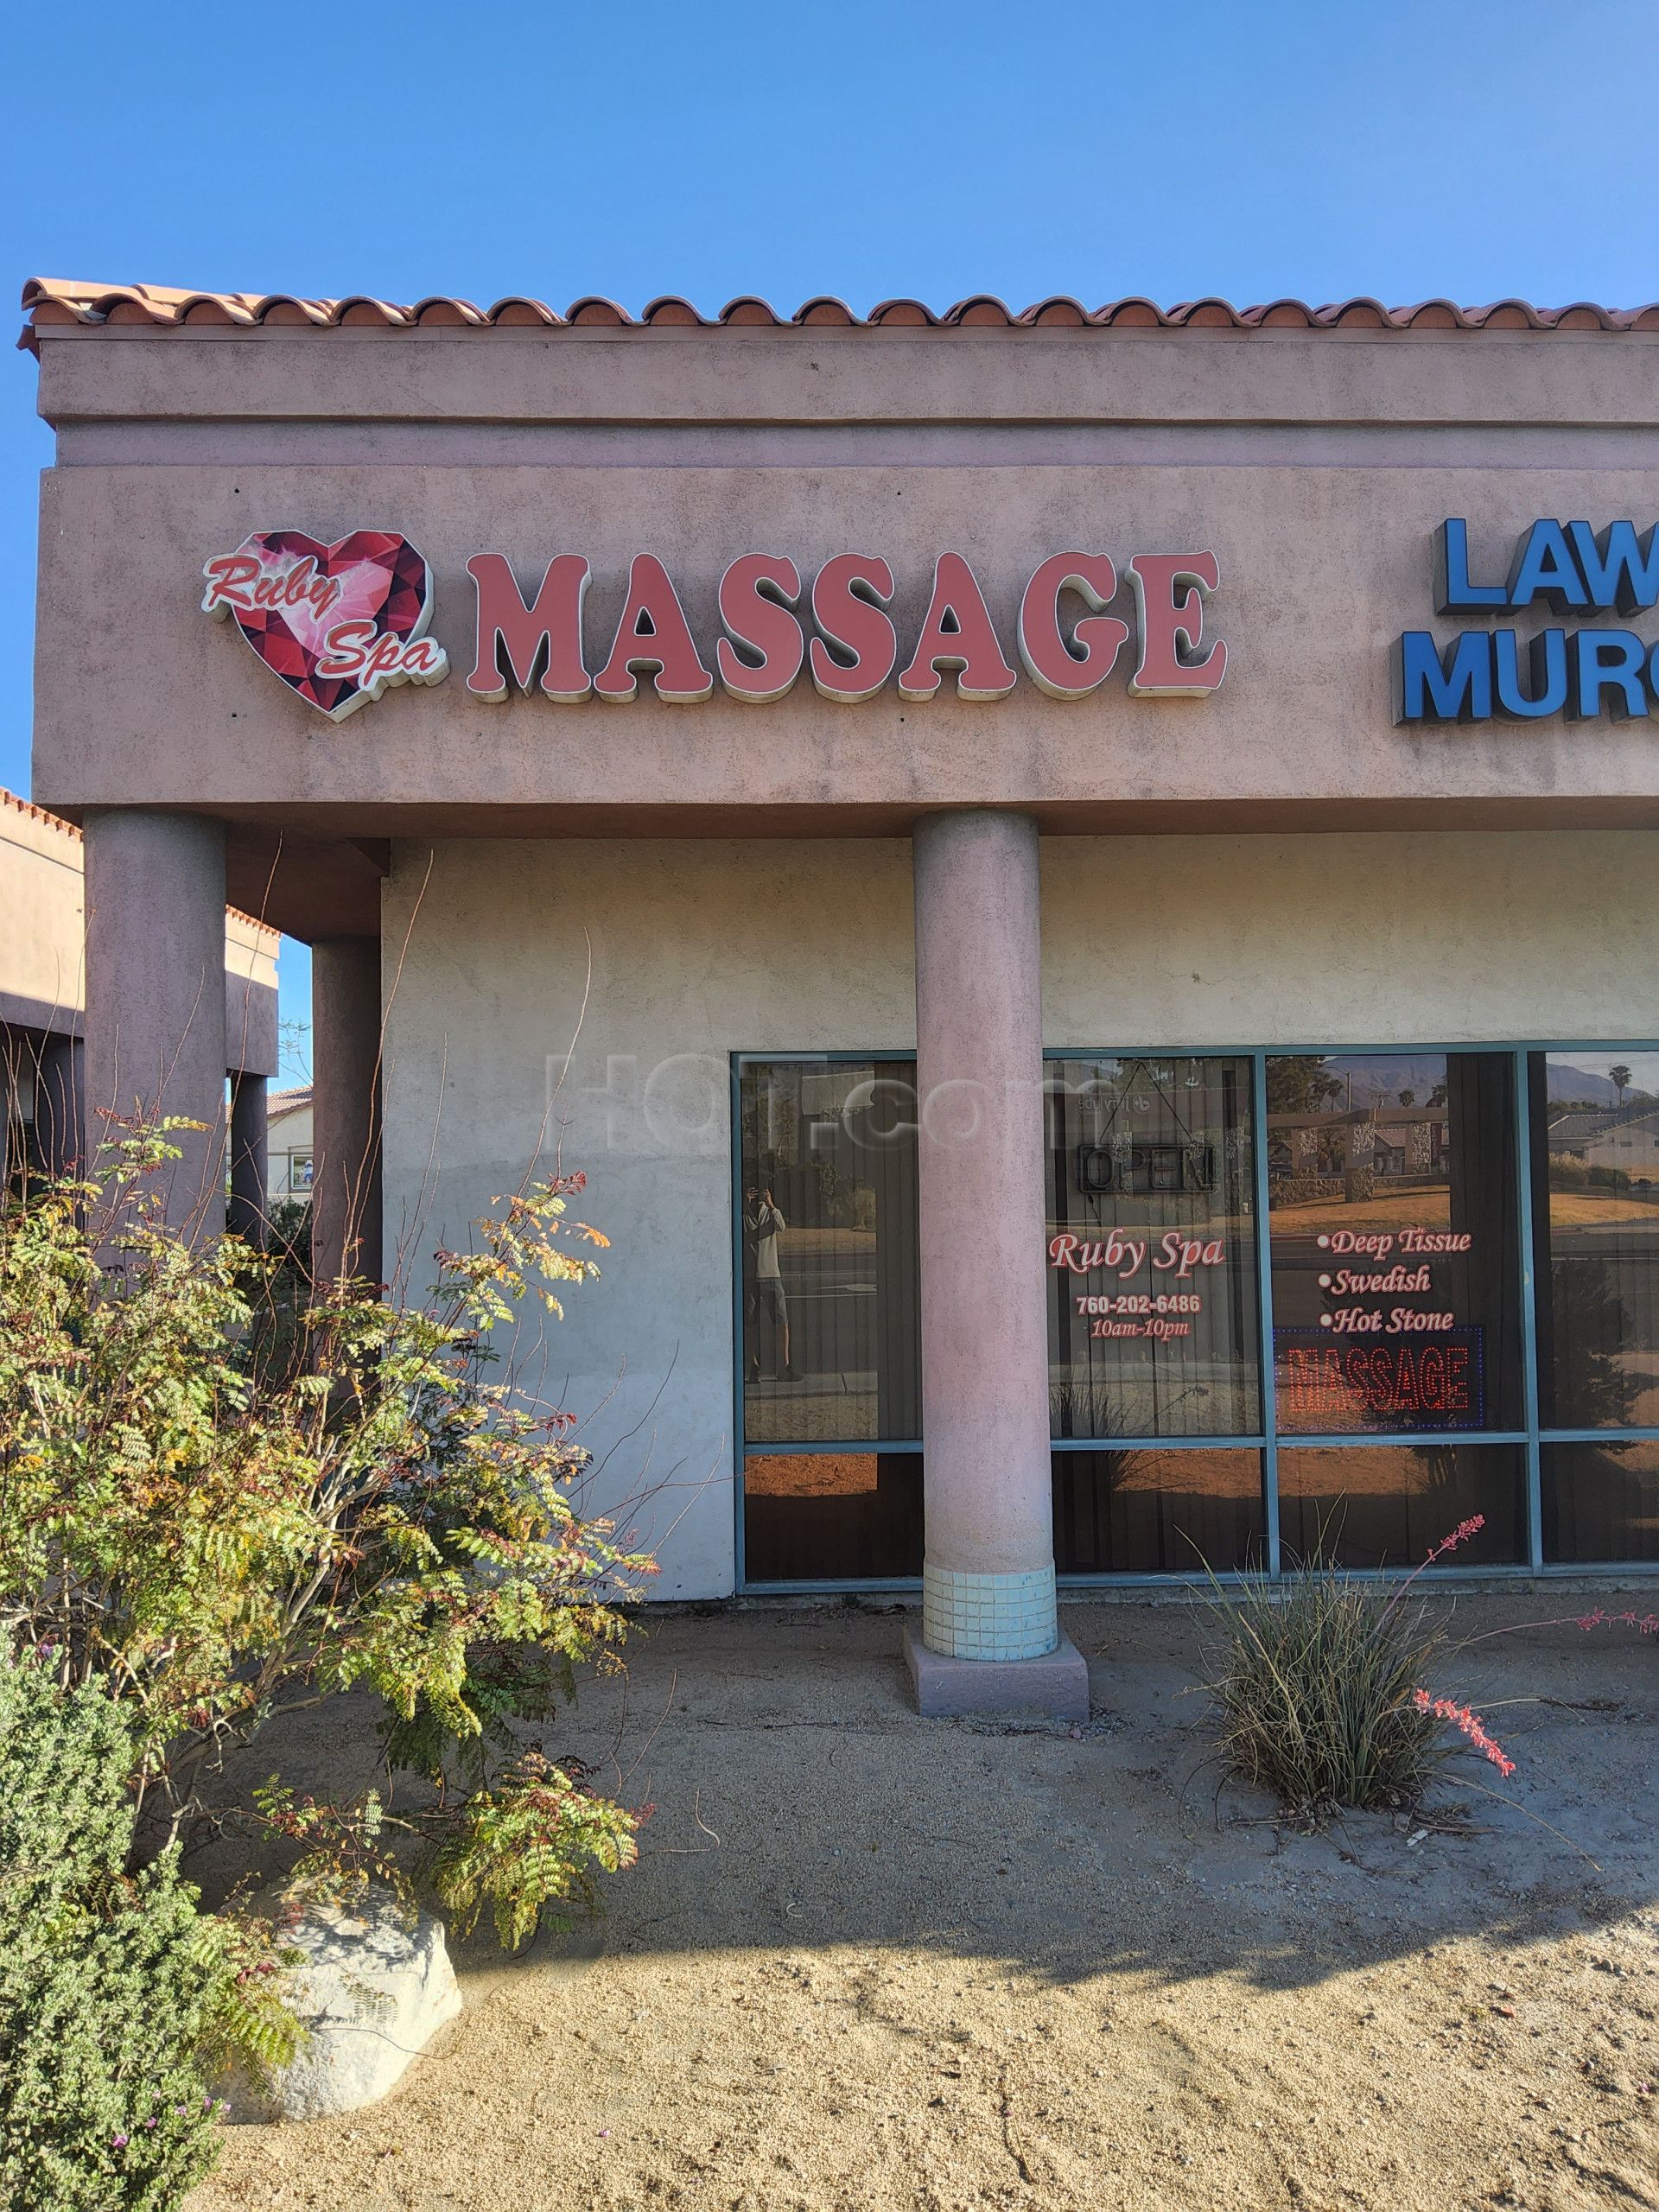 Cathedral City, California Ruby Spa